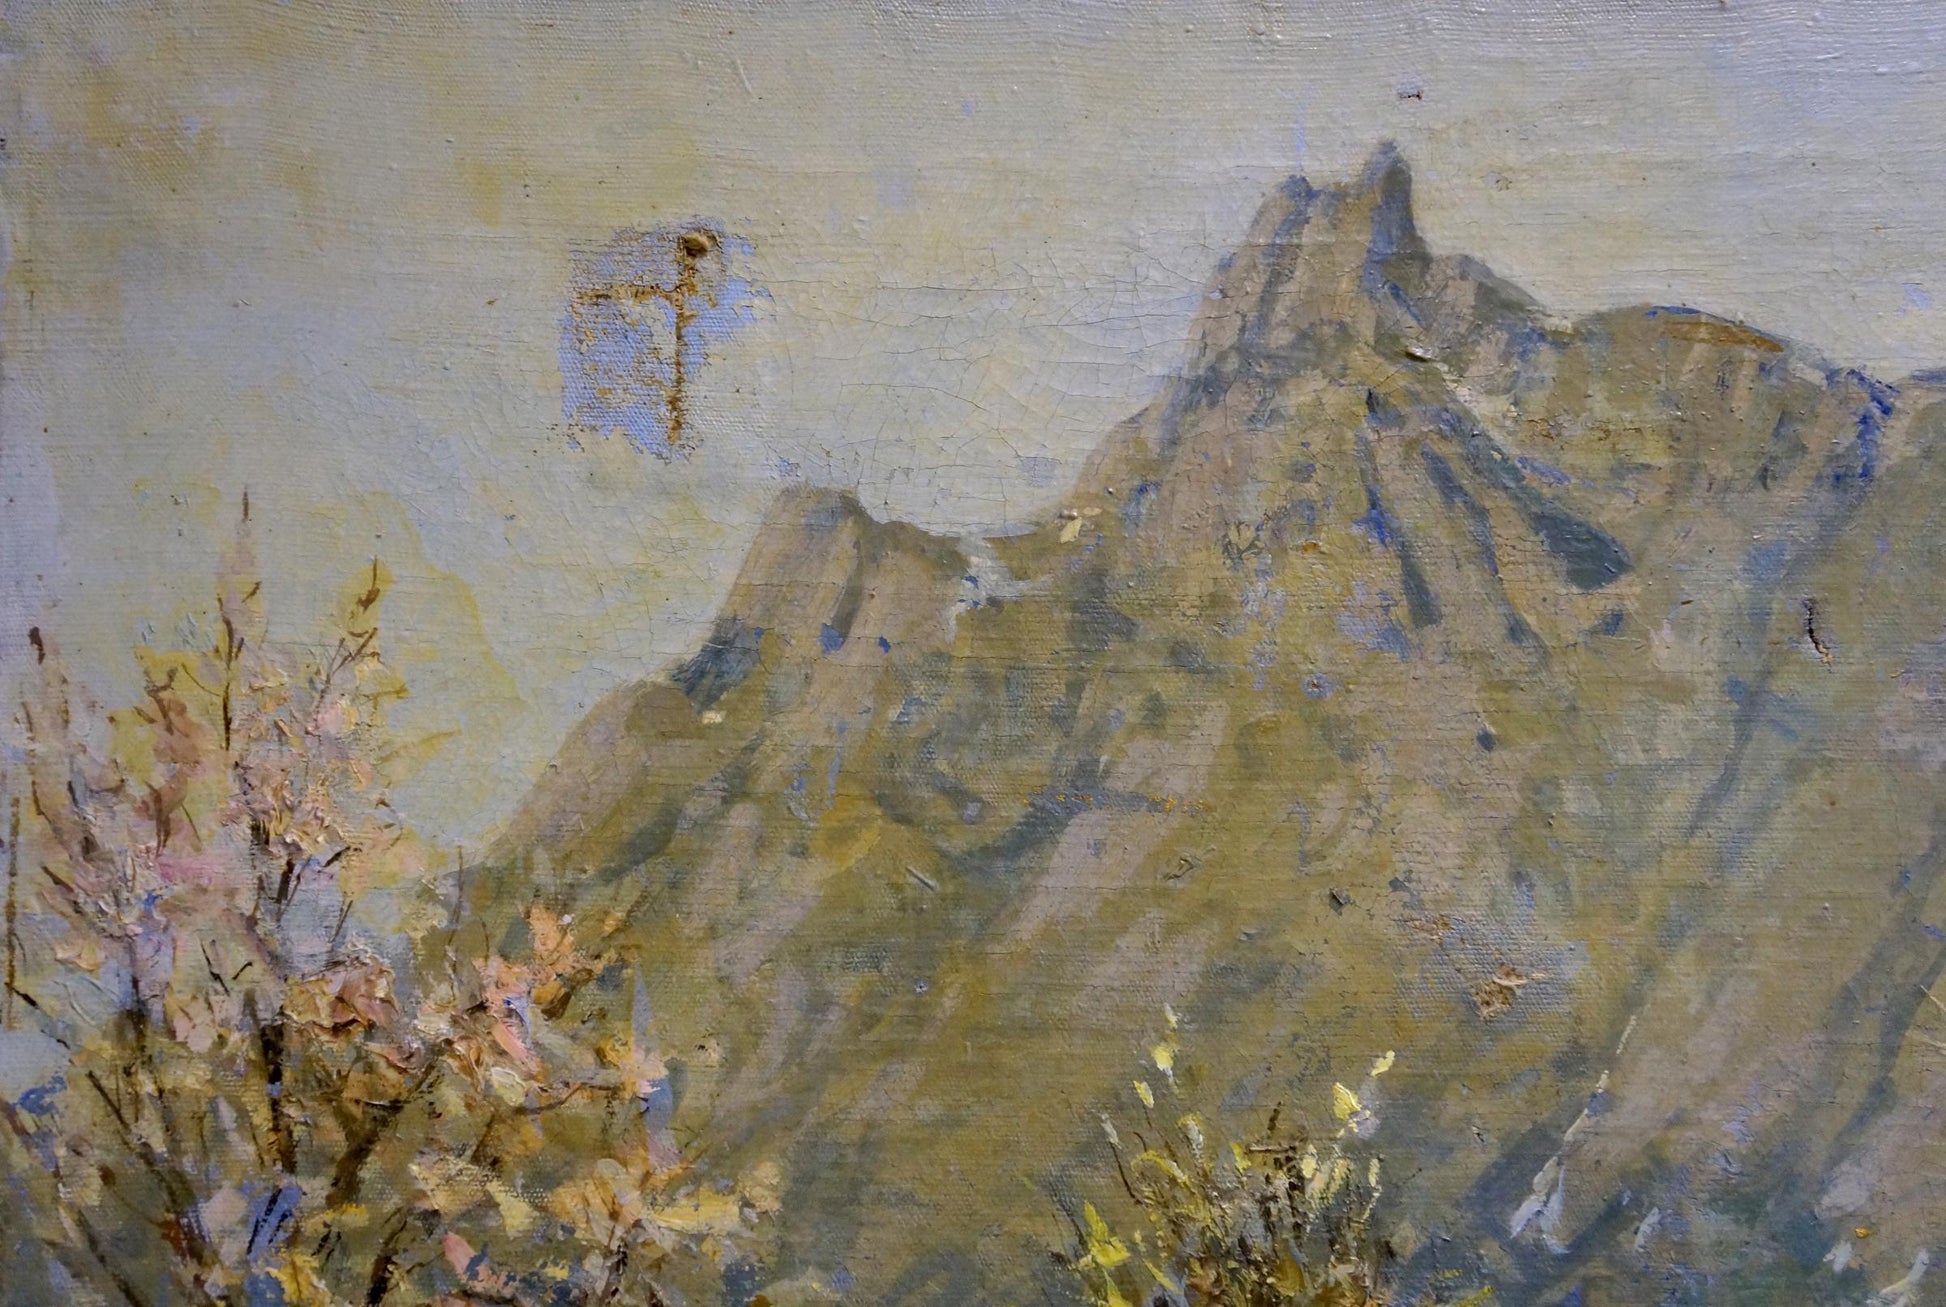 In his oil painting, V. Ferber captures the grandeur of a mountainous vista